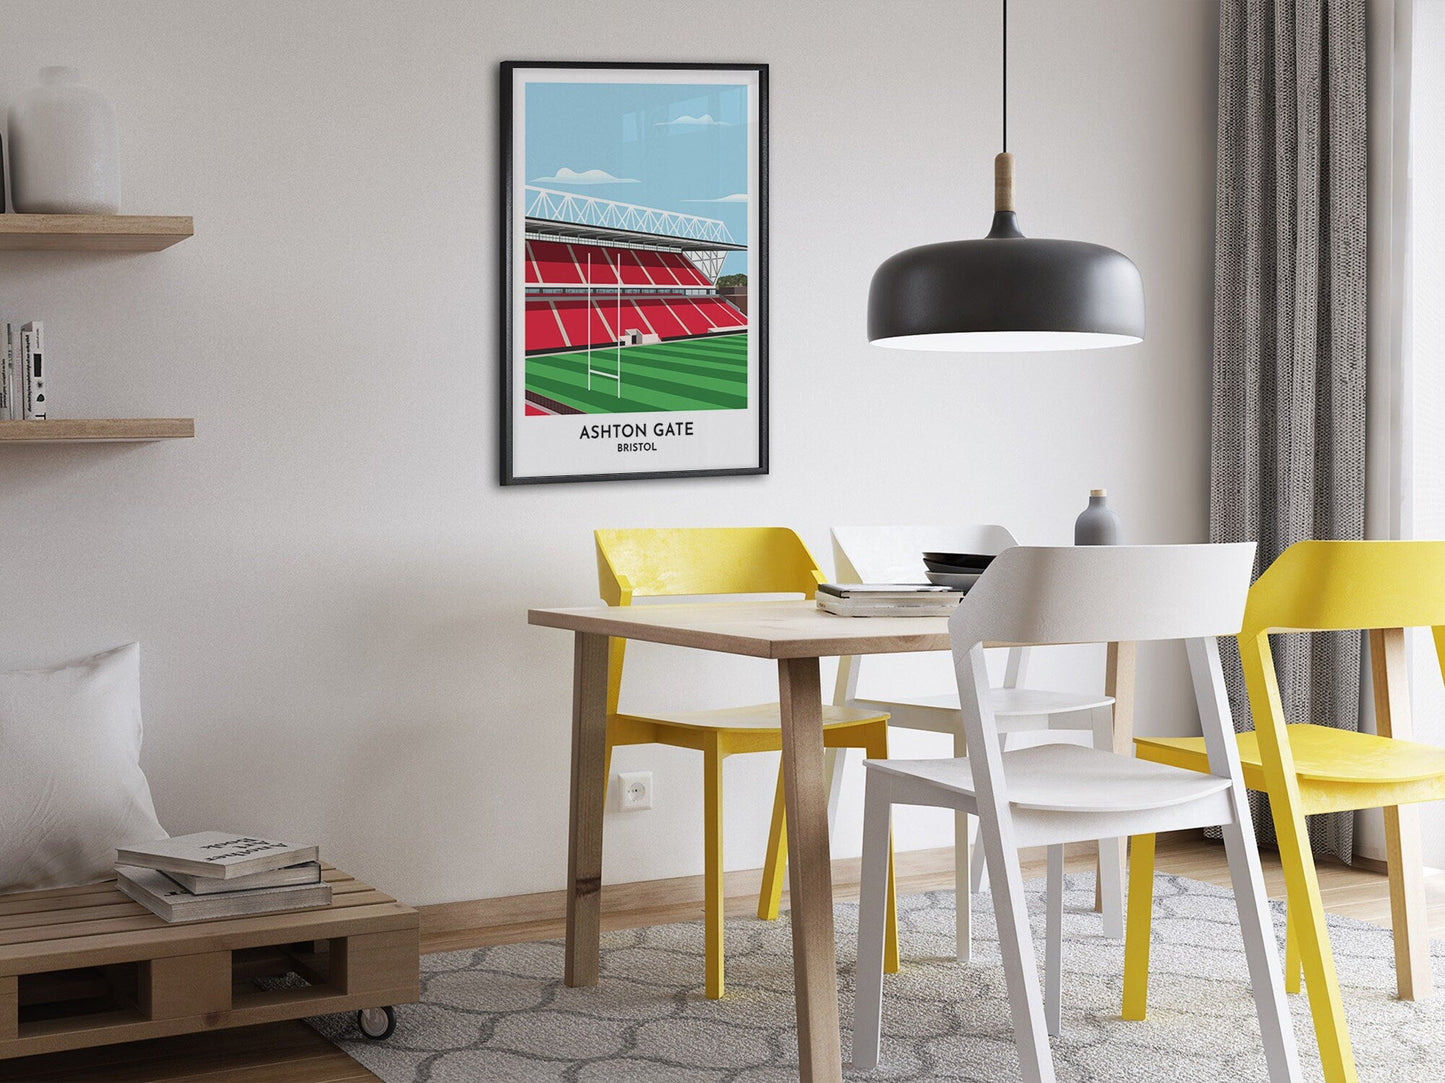 Bristol Rugby - Ashton Gate - Bears Rugby Gift - Contemporary Print - Gift for Men - Rugby Poster - Bespoke Gift for Him - Turf Football Art